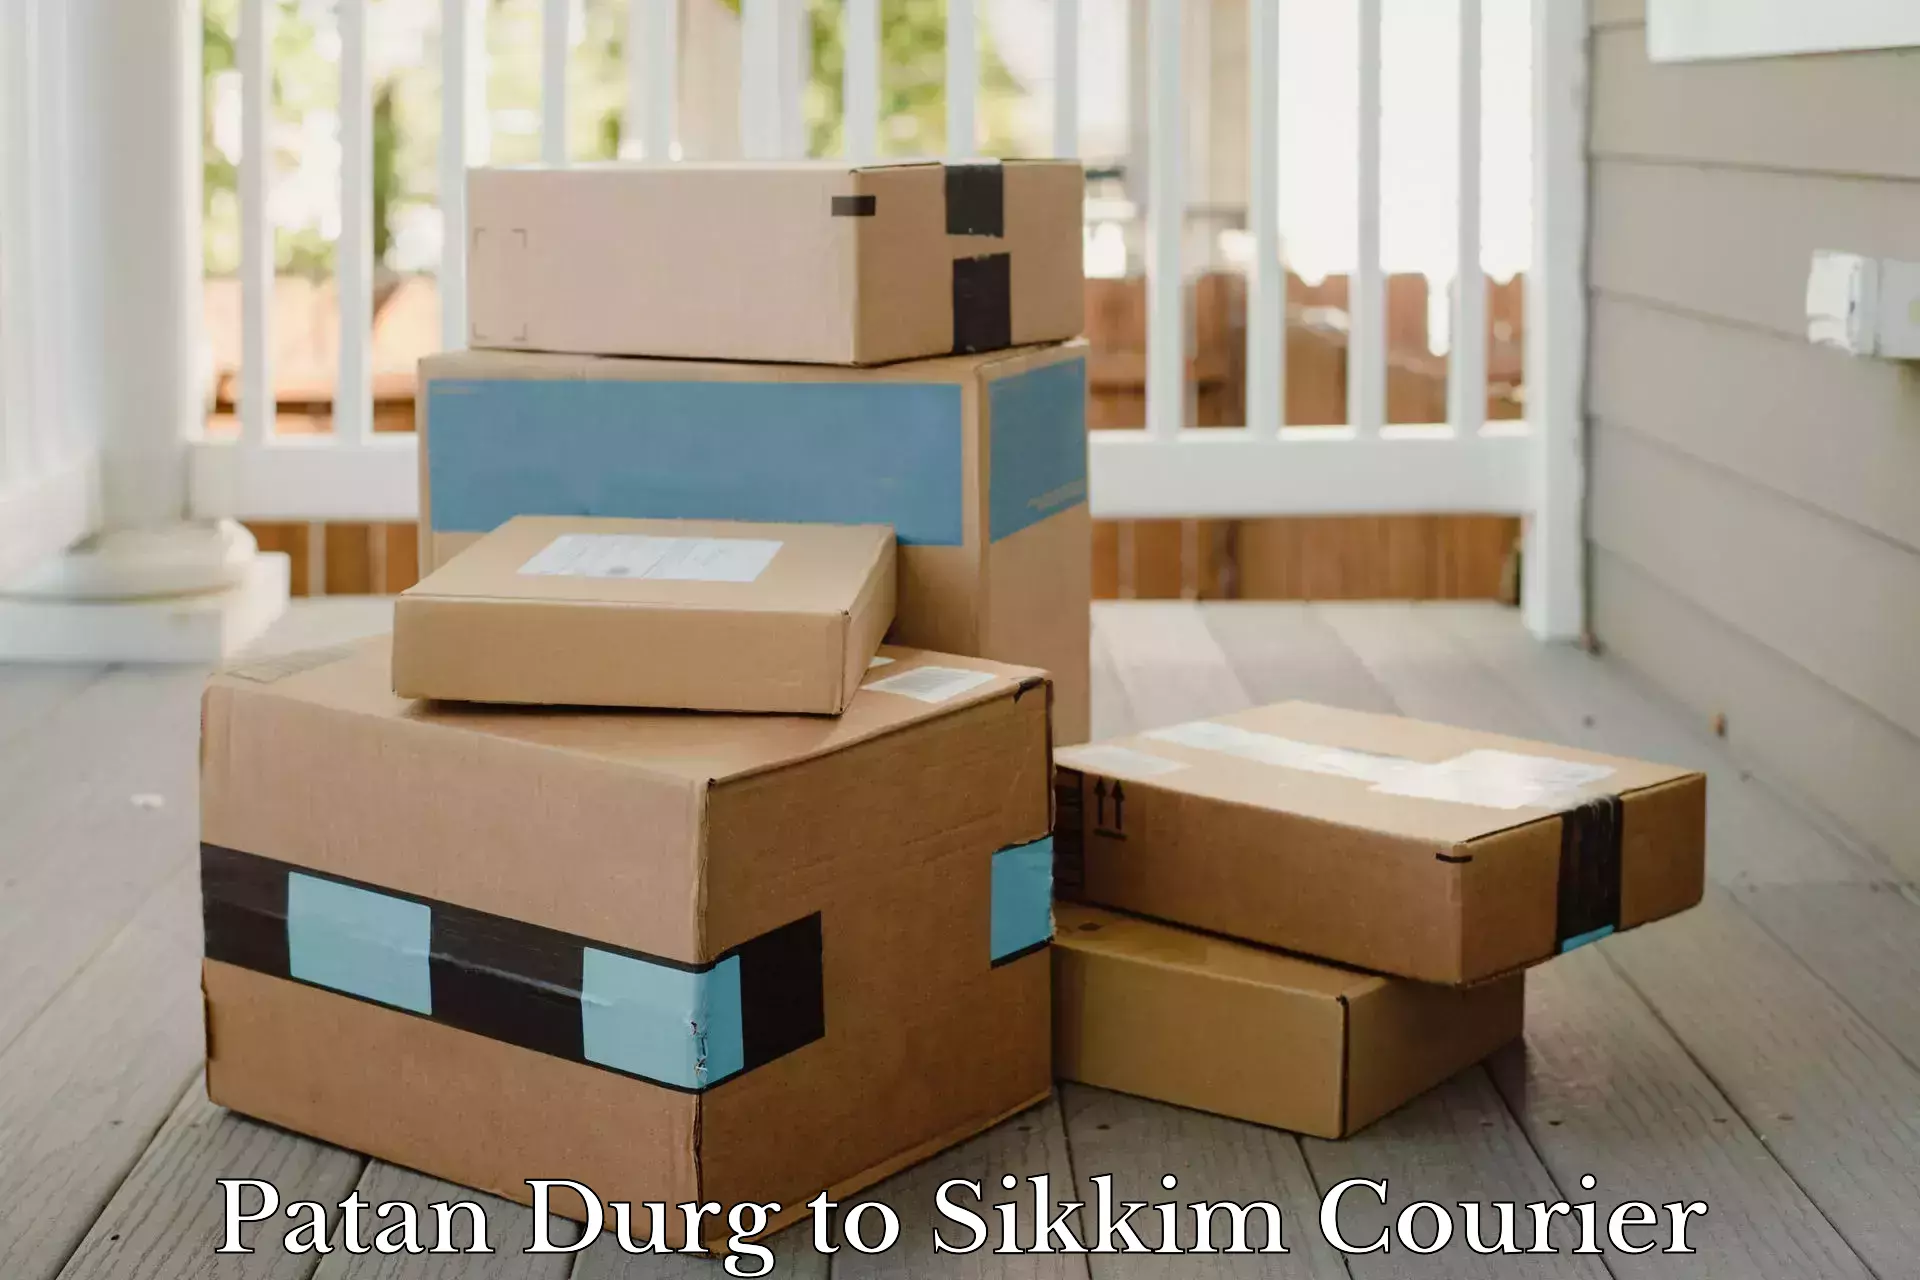 Round-the-clock parcel delivery Patan Durg to West Sikkim